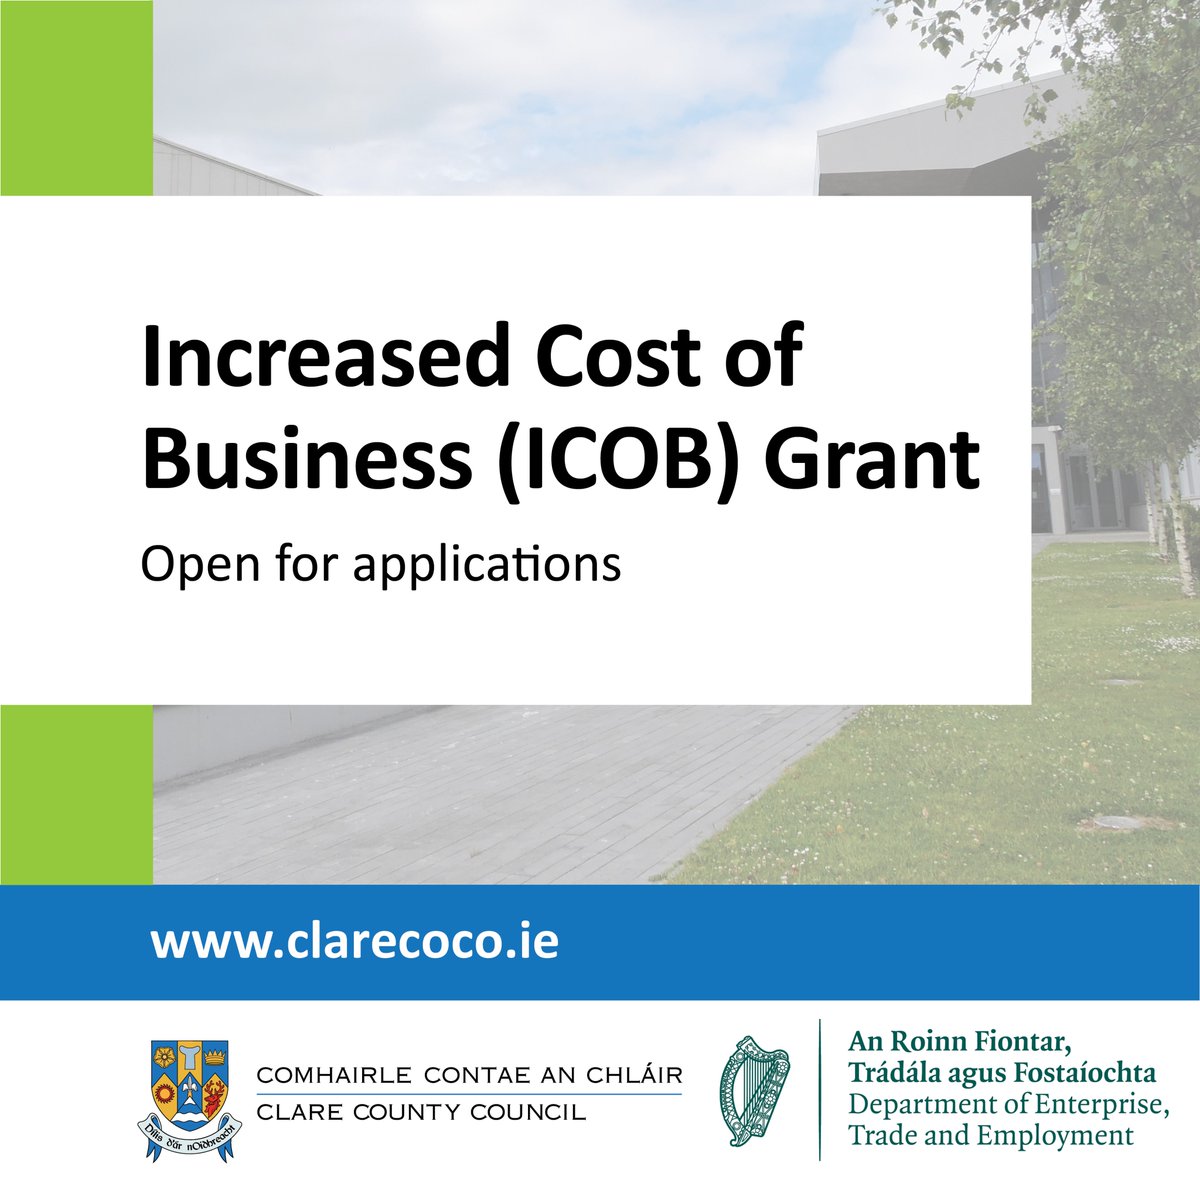 The deadline for Increased Cost of Business (ICOB) grant registration is fast approaching! Businesses have until May 1st to register on the ICOB Portal at icob.ie. Visit icob.ie for more information.